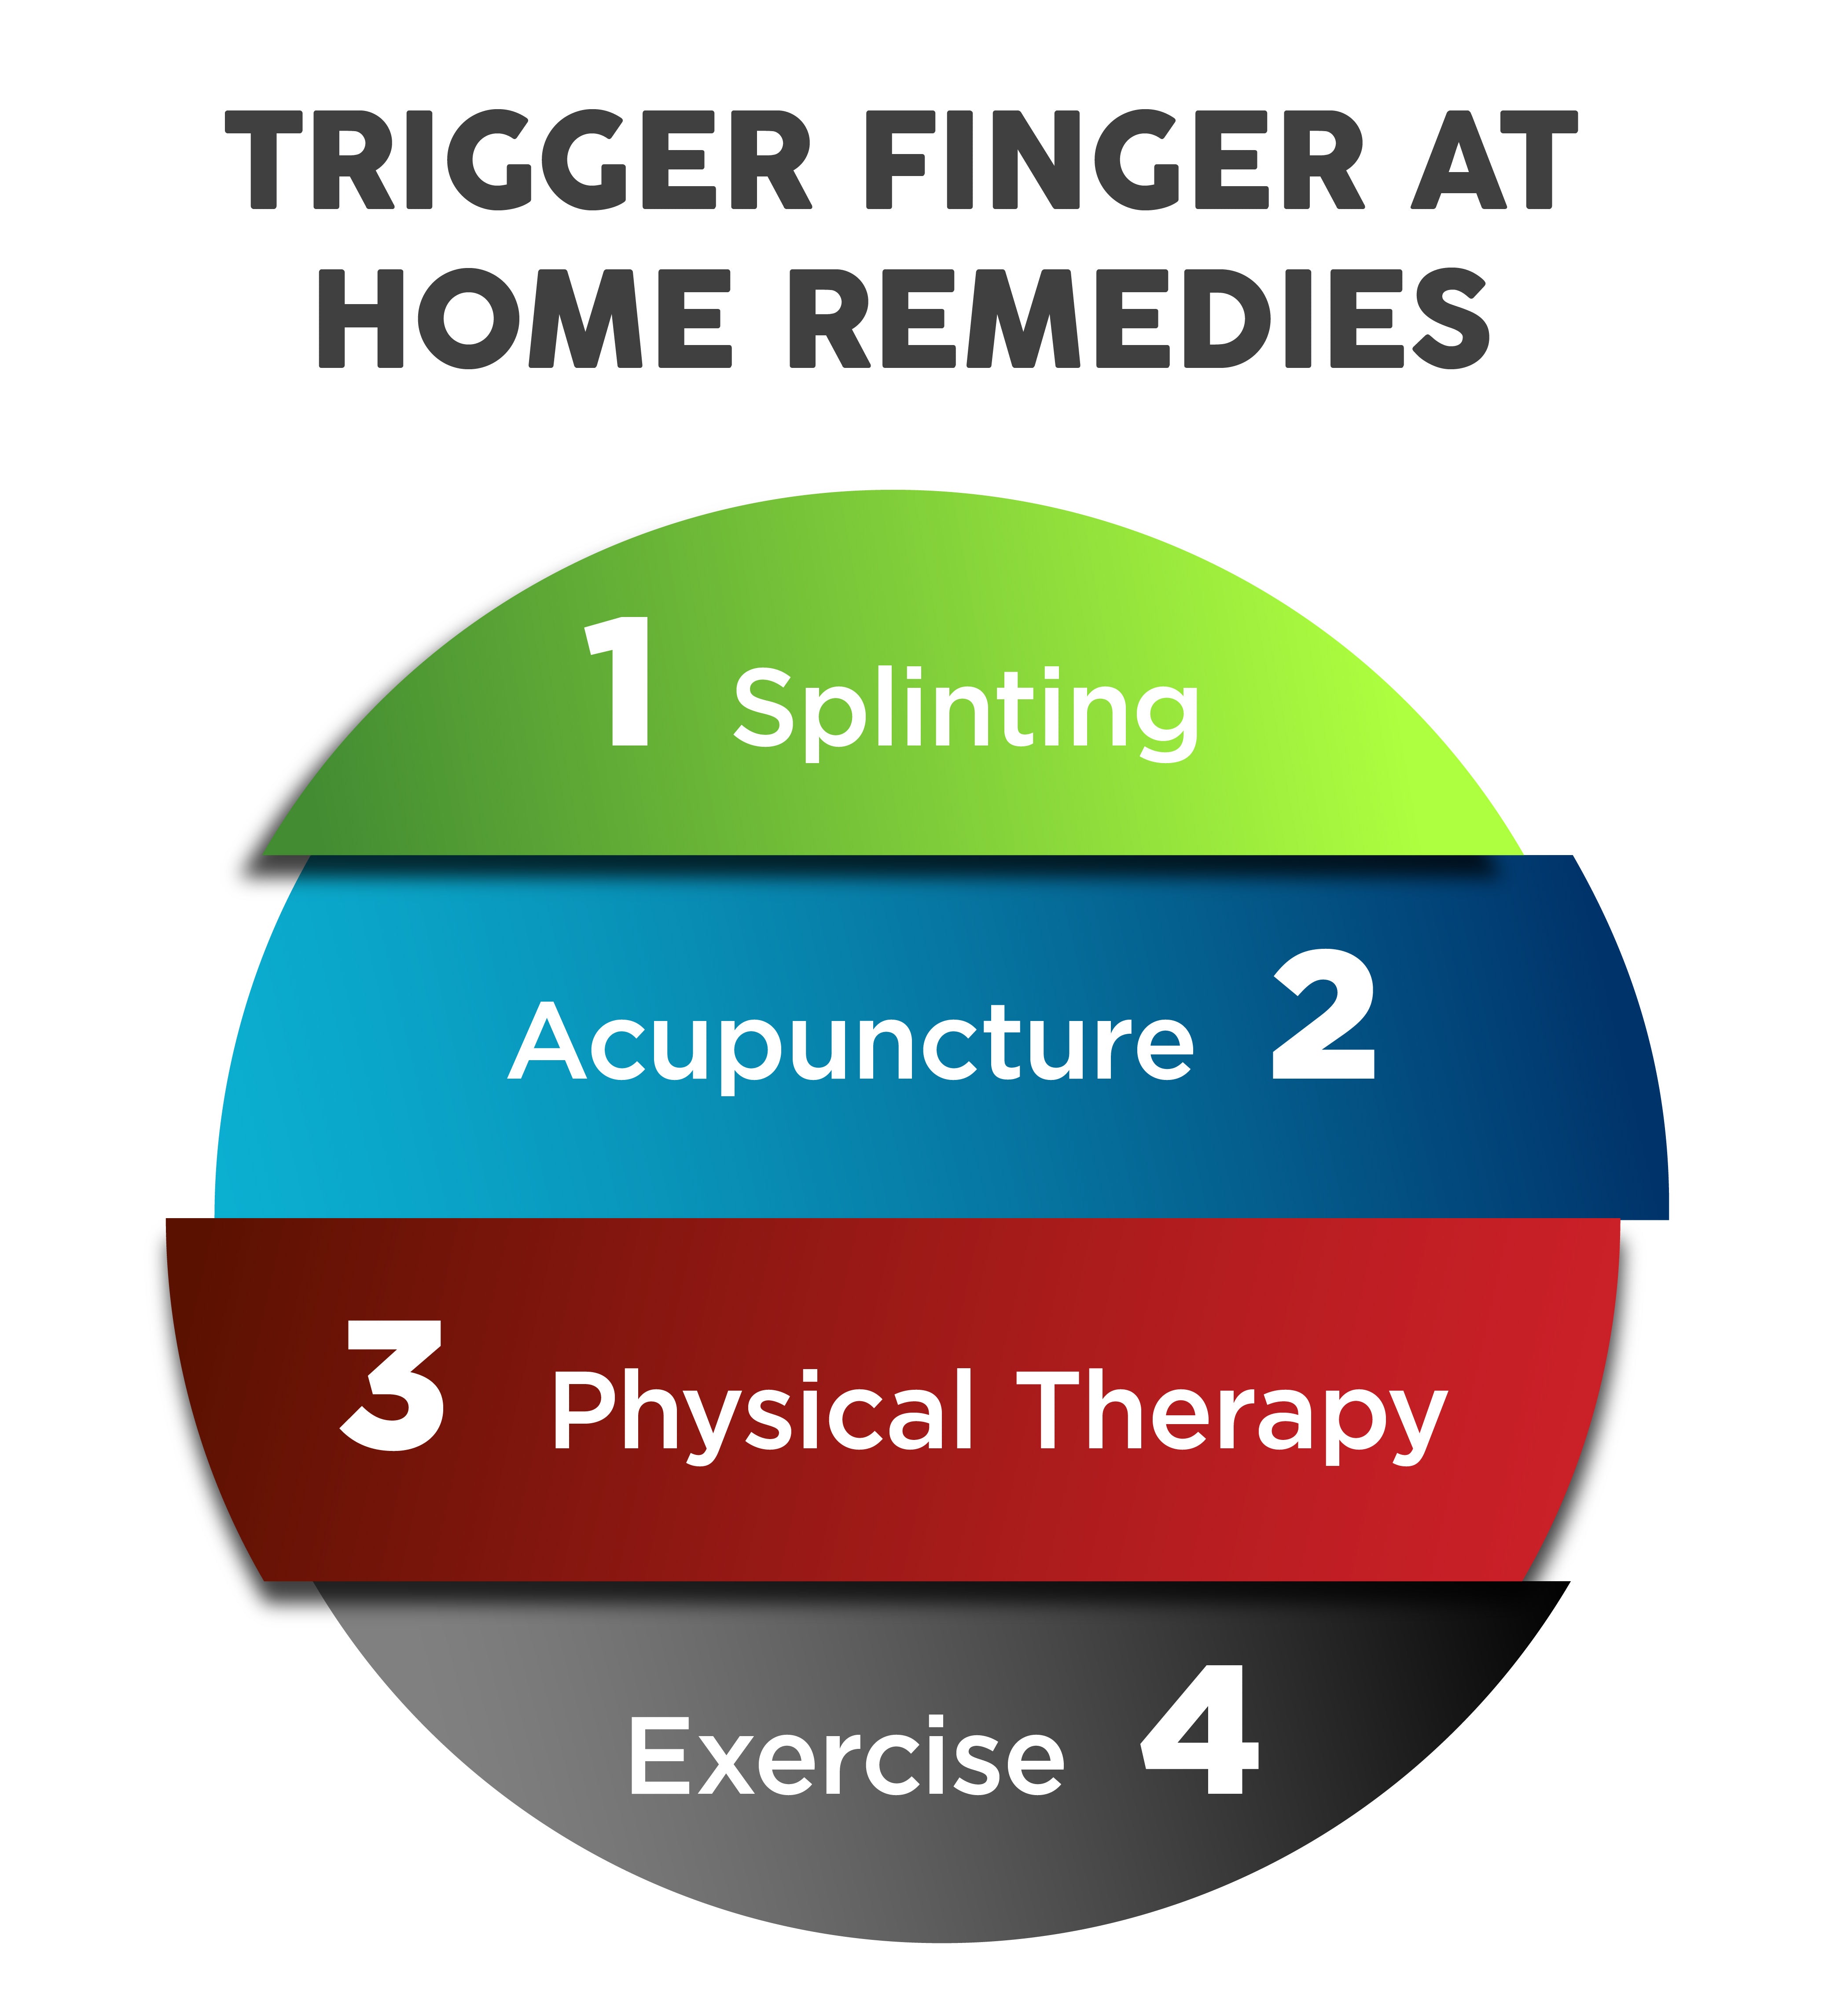 Easy ways to do trigger finger physical therapy at home with simple exercises and using a brace